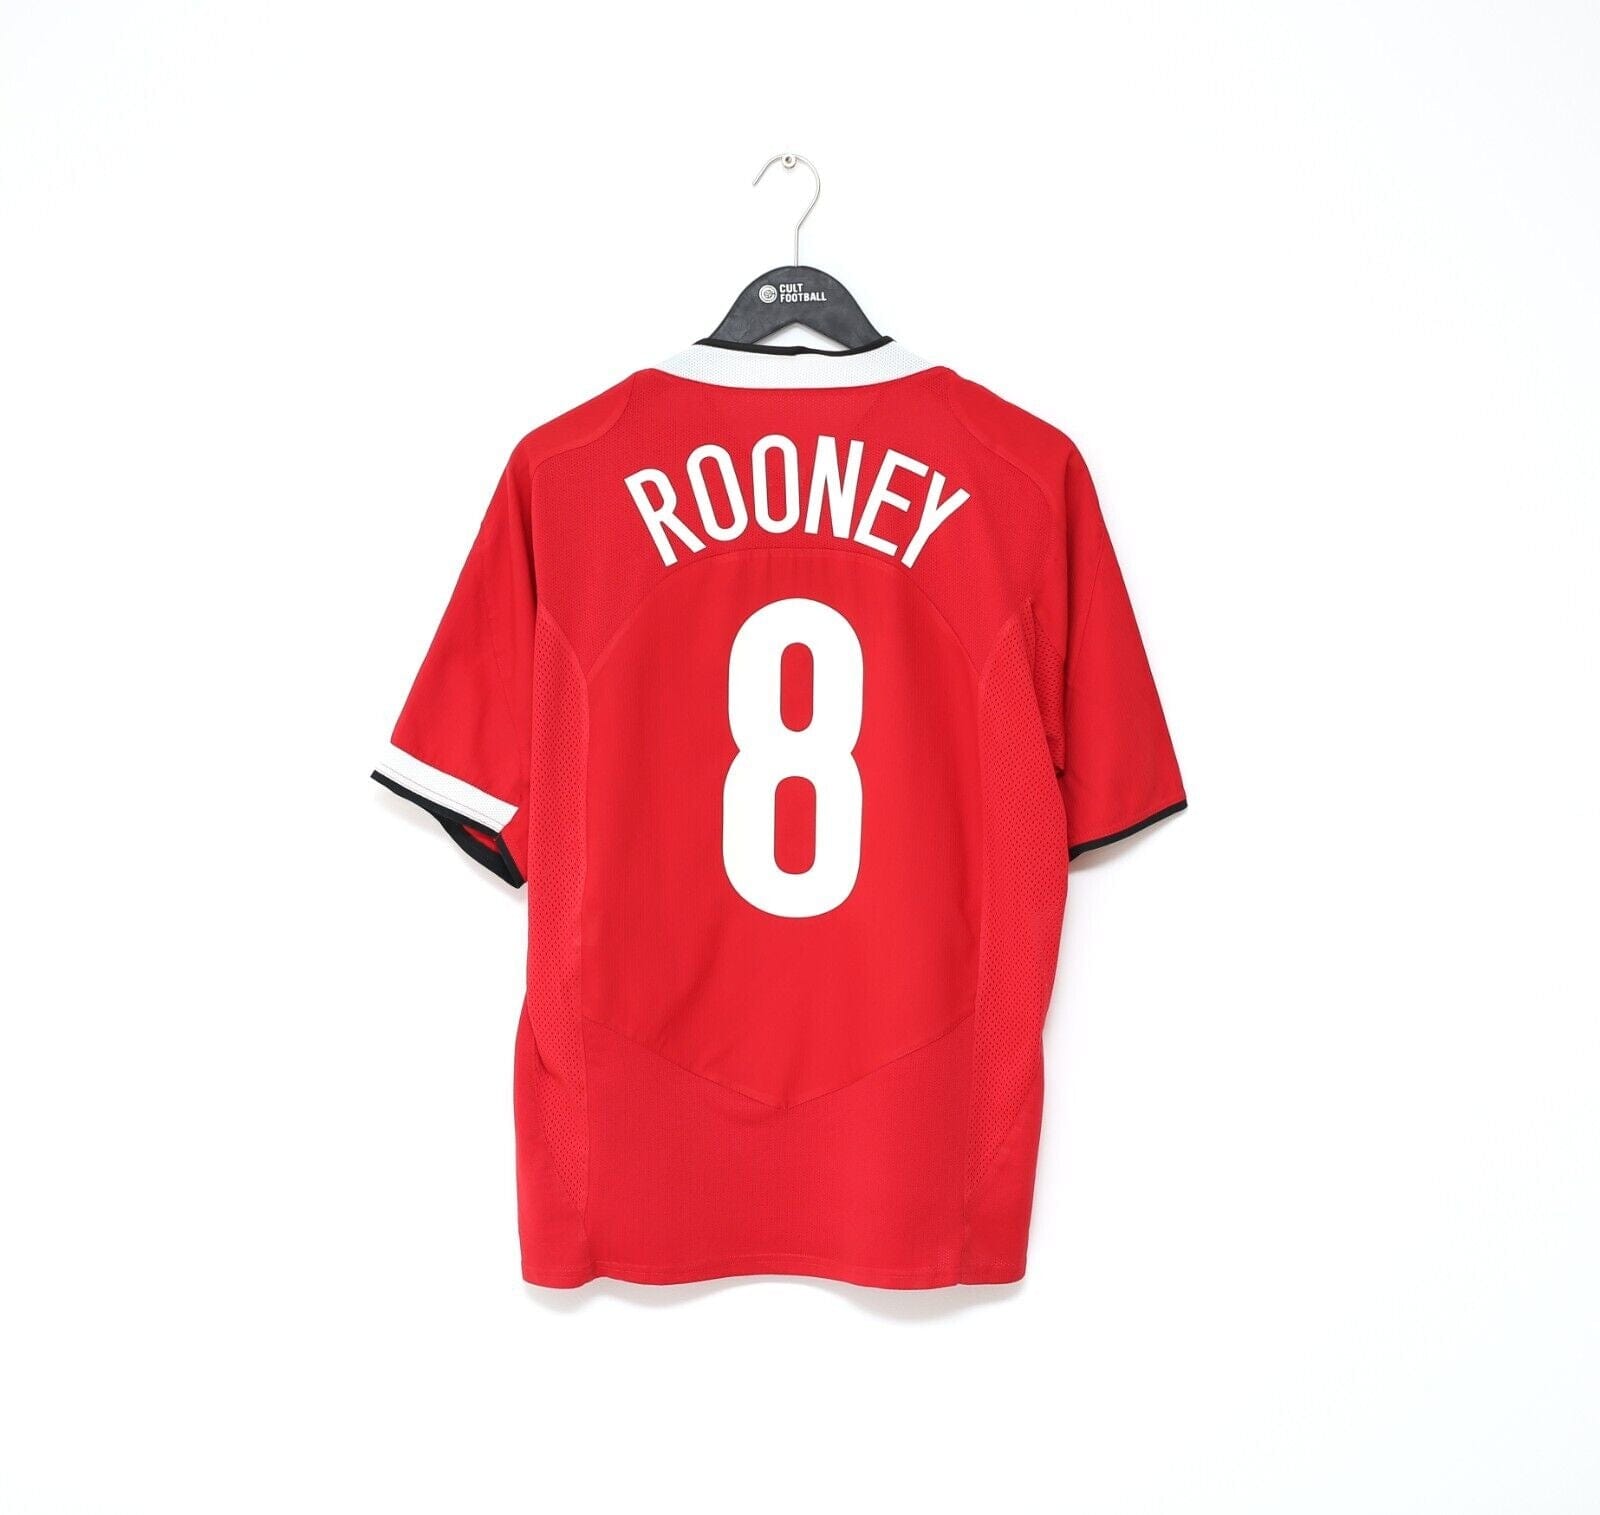 2004/06 ROONEY #8 Manchester United Vintage Nike CL Home Football Shirt (M)